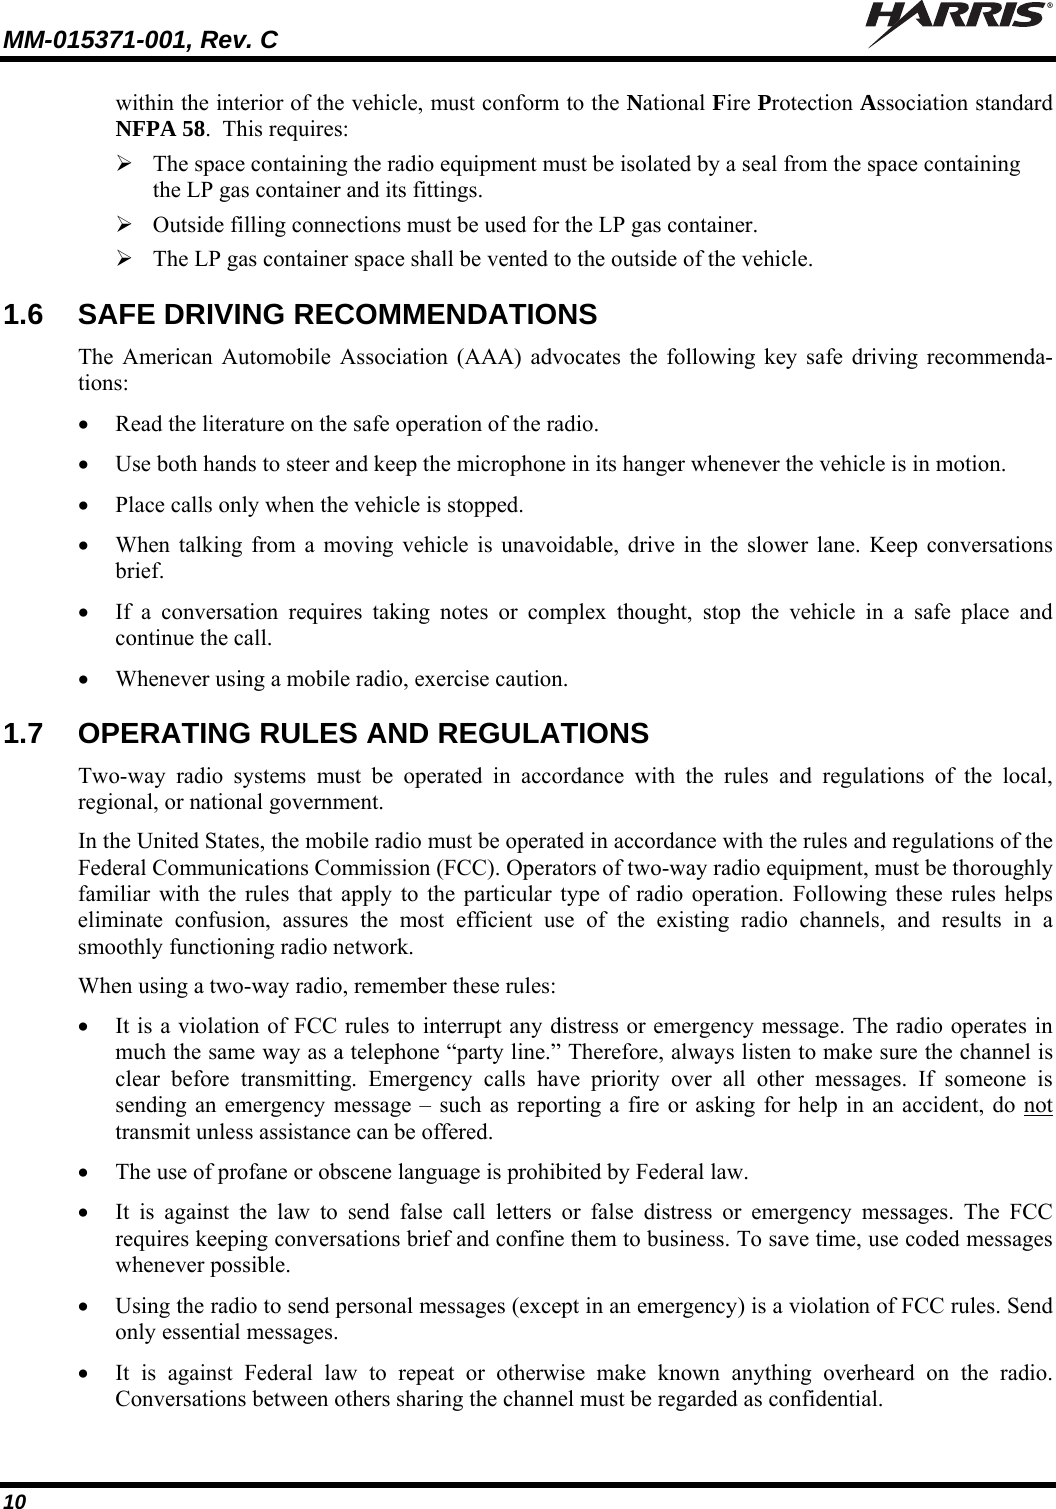 MM-015371-001, Rev. C   10 within the interior of the vehicle, must conform to the National Fire Protection Association standard NFPA 58.  This requires:  The space containing the radio equipment must be isolated by a seal from the space containing the LP gas container and its fittings.  Outside filling connections must be used for the LP gas container.  The LP gas container space shall be vented to the outside of the vehicle. 1.6  SAFE DRIVING RECOMMENDATIONS The American Automobile Association (AAA) advocates the following key safe driving recommenda-tions:  Read the literature on the safe operation of the radio.  Use both hands to steer and keep the microphone in its hanger whenever the vehicle is in motion.  Place calls only when the vehicle is stopped.  When talking from a moving vehicle is unavoidable, drive in the slower lane. Keep conversations brief.  If a conversation requires taking notes or complex thought, stop the vehicle in a safe place and continue the call.  Whenever using a mobile radio, exercise caution. 1.7  OPERATING RULES AND REGULATIONS Two-way radio systems must be operated in accordance with the rules and regulations of the local, regional, or national government. In the United States, the mobile radio must be operated in accordance with the rules and regulations of the Federal Communications Commission (FCC). Operators of two-way radio equipment, must be thoroughly familiar with the rules that apply to the particular type of radio operation. Following these rules helps eliminate confusion, assures the most efficient use of the existing radio channels, and results in a smoothly functioning radio network. When using a two-way radio, remember these rules:  It is a violation of FCC rules to interrupt any distress or emergency message. The radio operates in much the same way as a telephone “party line.” Therefore, always listen to make sure the channel is clear before transmitting. Emergency calls have priority over all other messages. If someone is sending an emergency message – such as reporting a fire or asking for help in an accident, do not transmit unless assistance can be offered.  The use of profane or obscene language is prohibited by Federal law.  It is against the law to send false call letters or false distress or emergency messages. The FCC requires keeping conversations brief and confine them to business. To save time, use coded messages whenever possible.  Using the radio to send personal messages (except in an emergency) is a violation of FCC rules. Send only essential messages.  It is against Federal law to repeat or otherwise make known anything overheard on the radio. Conversations between others sharing the channel must be regarded as confidential. 